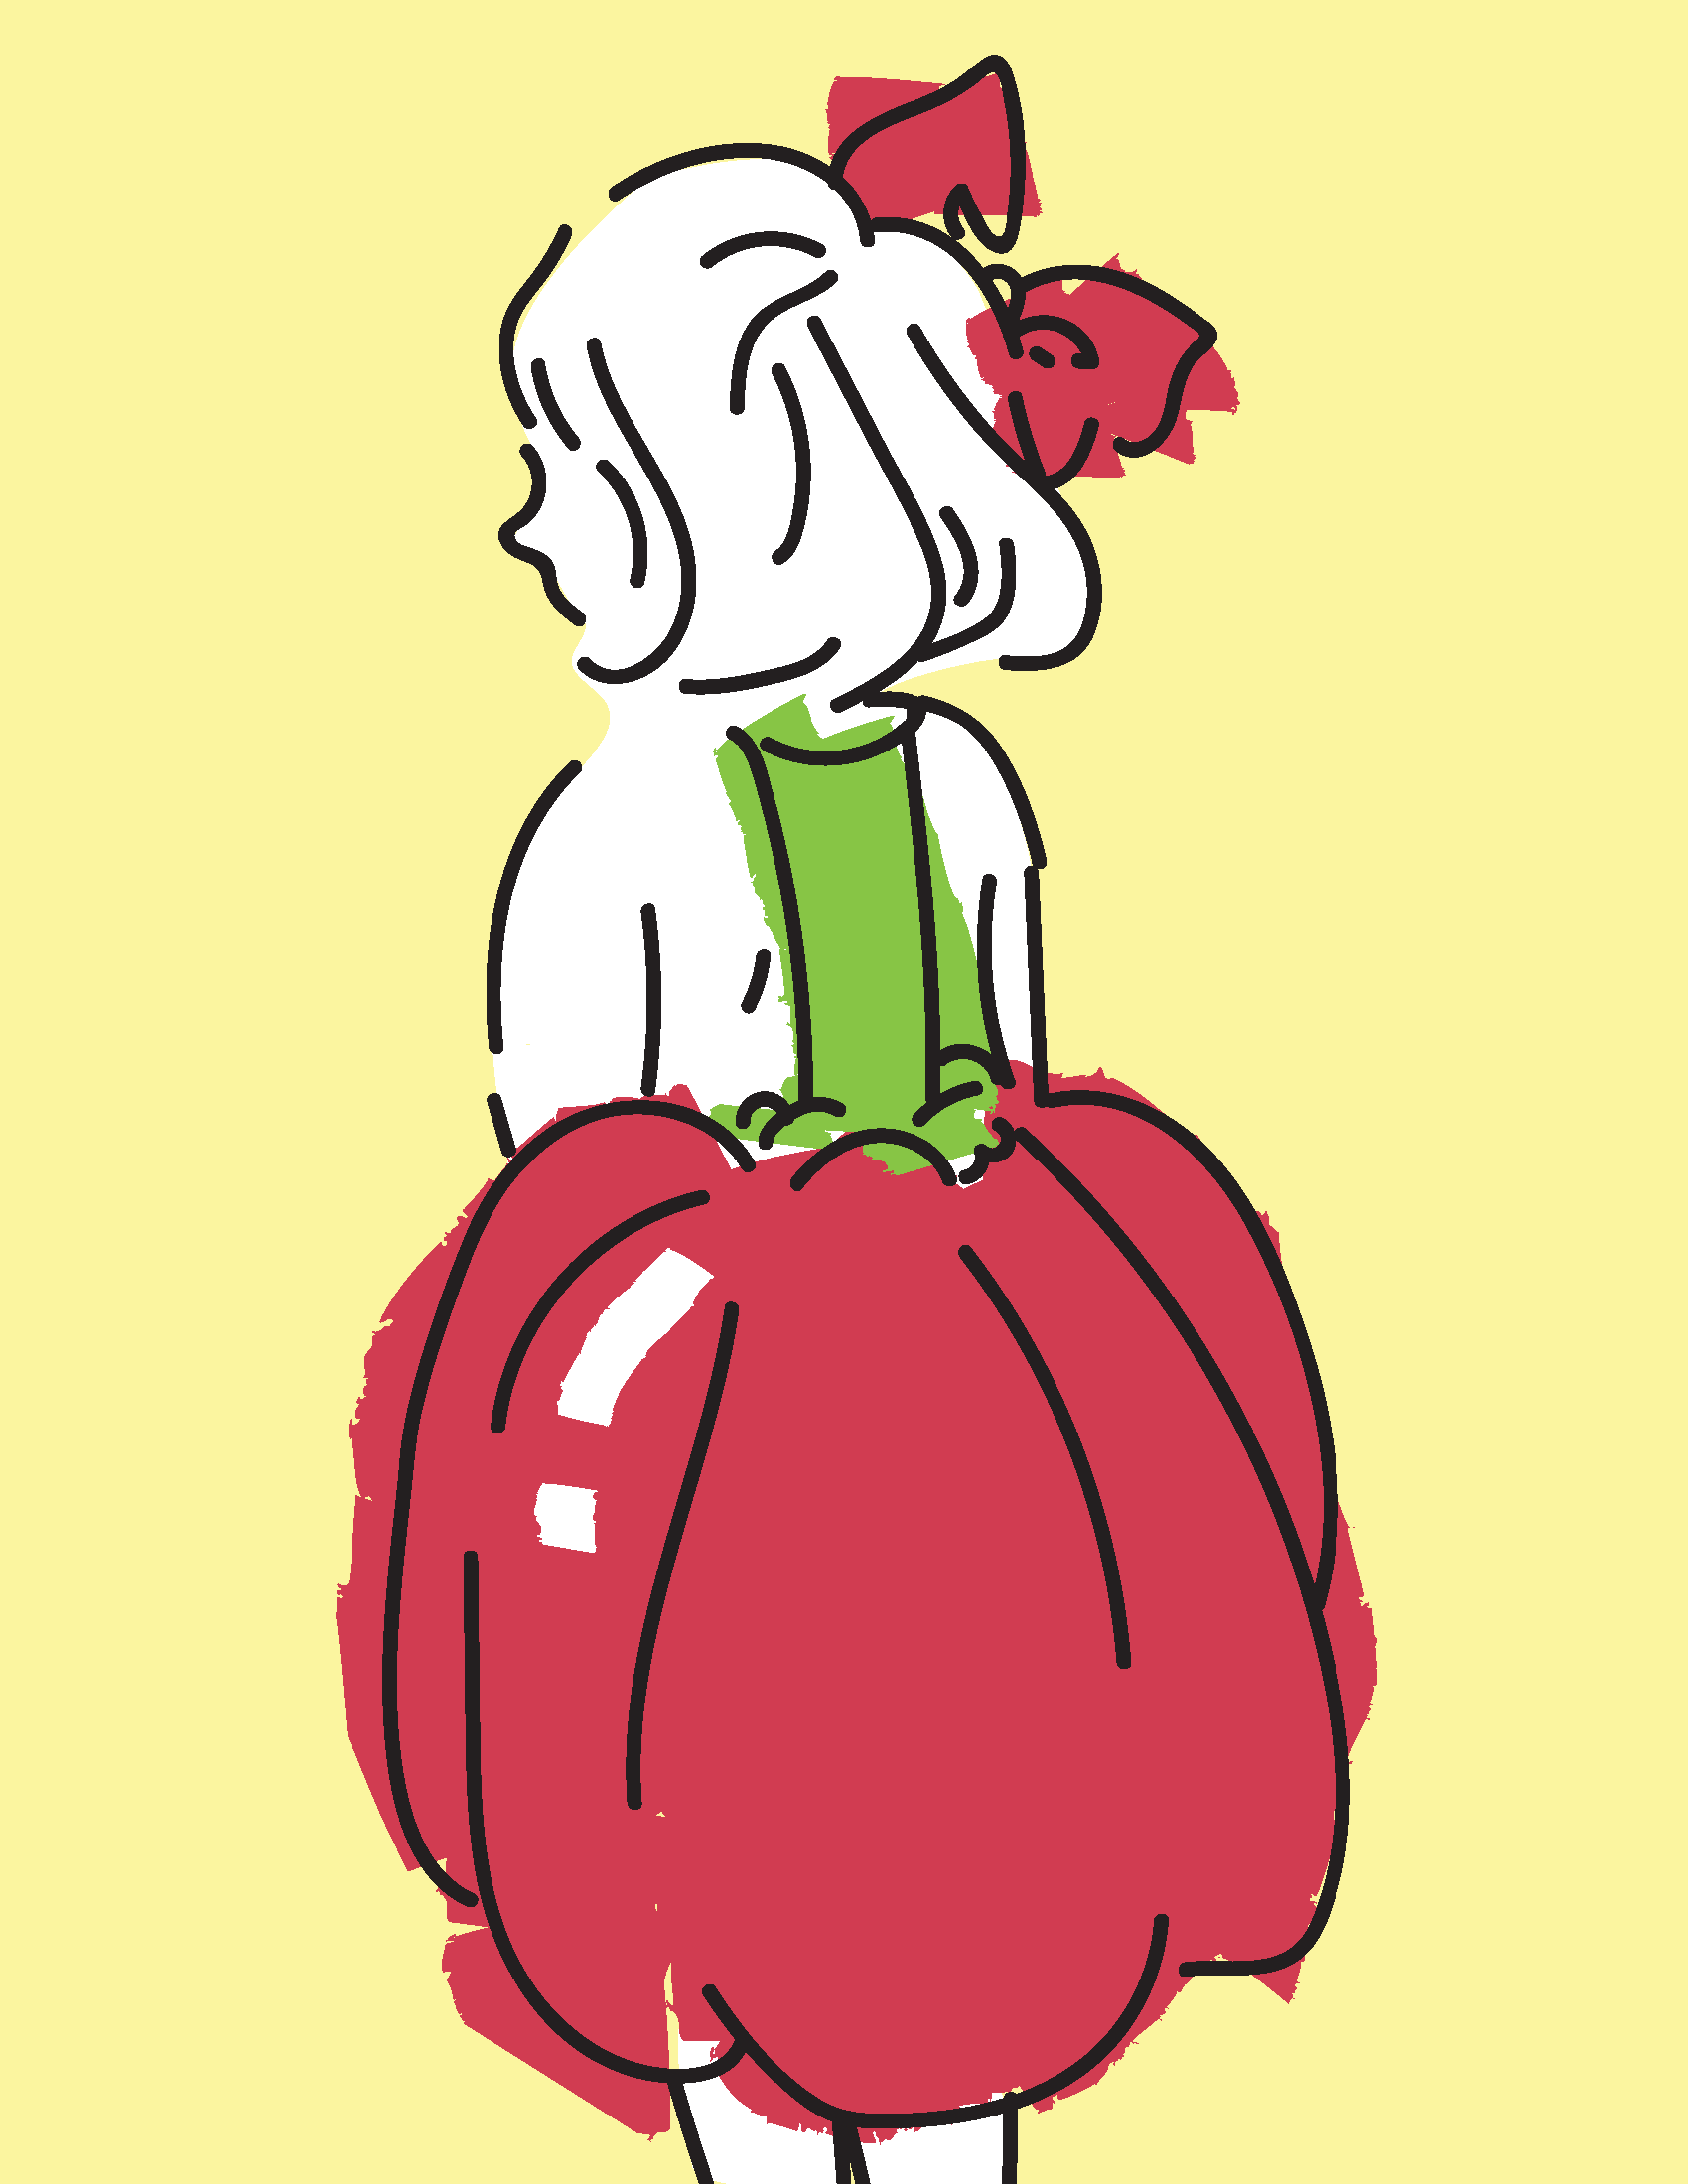 girlwithapepperdress.png